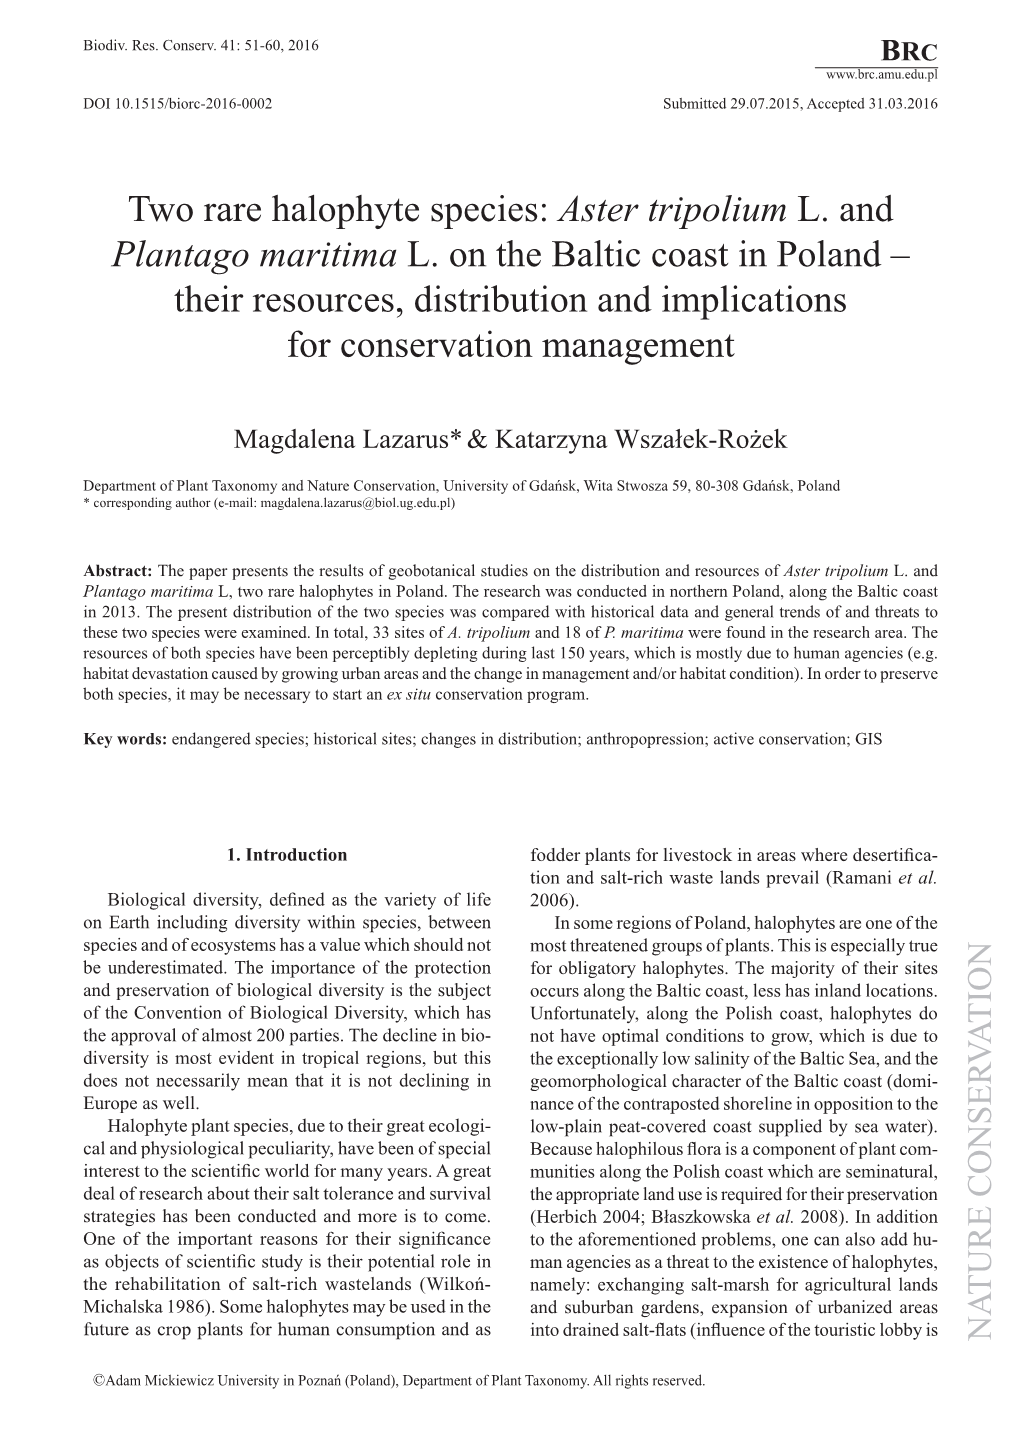 Aster Tripolium L. and Plantago Maritima L. on the Baltic Coast in Poland – Their Resources, Distribution and Implications for Conservation Management